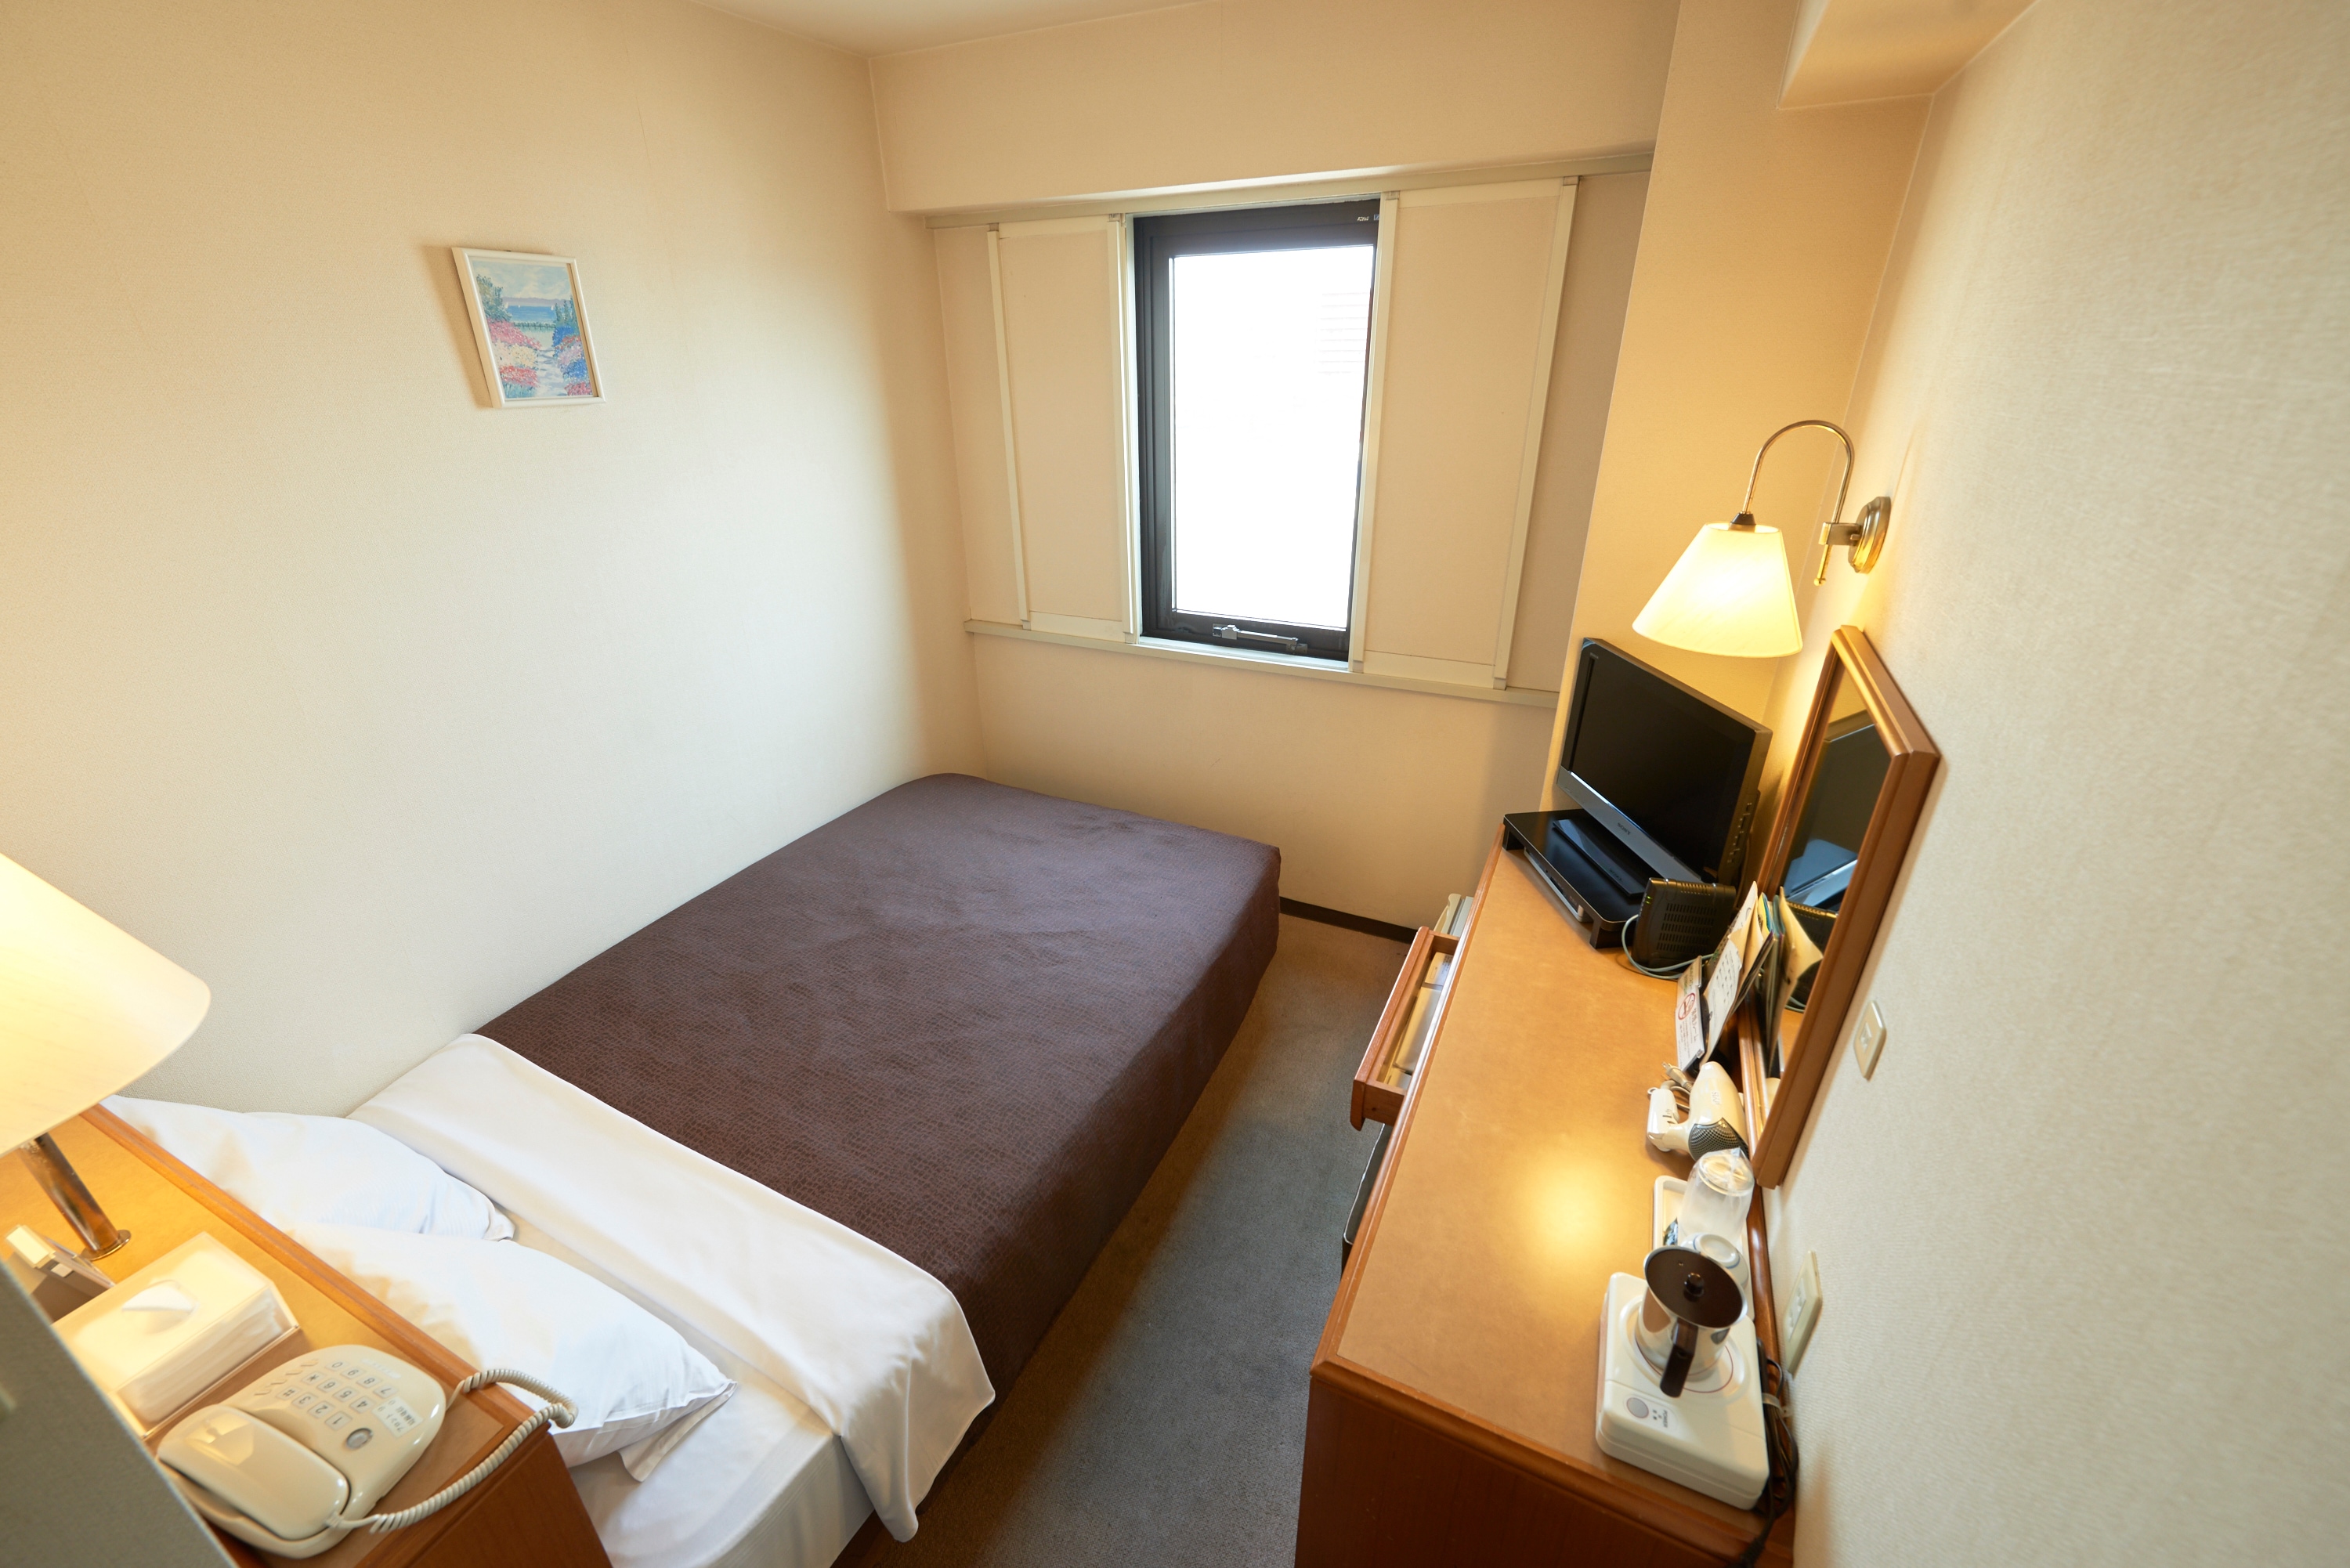 Semi-double room for 2 people